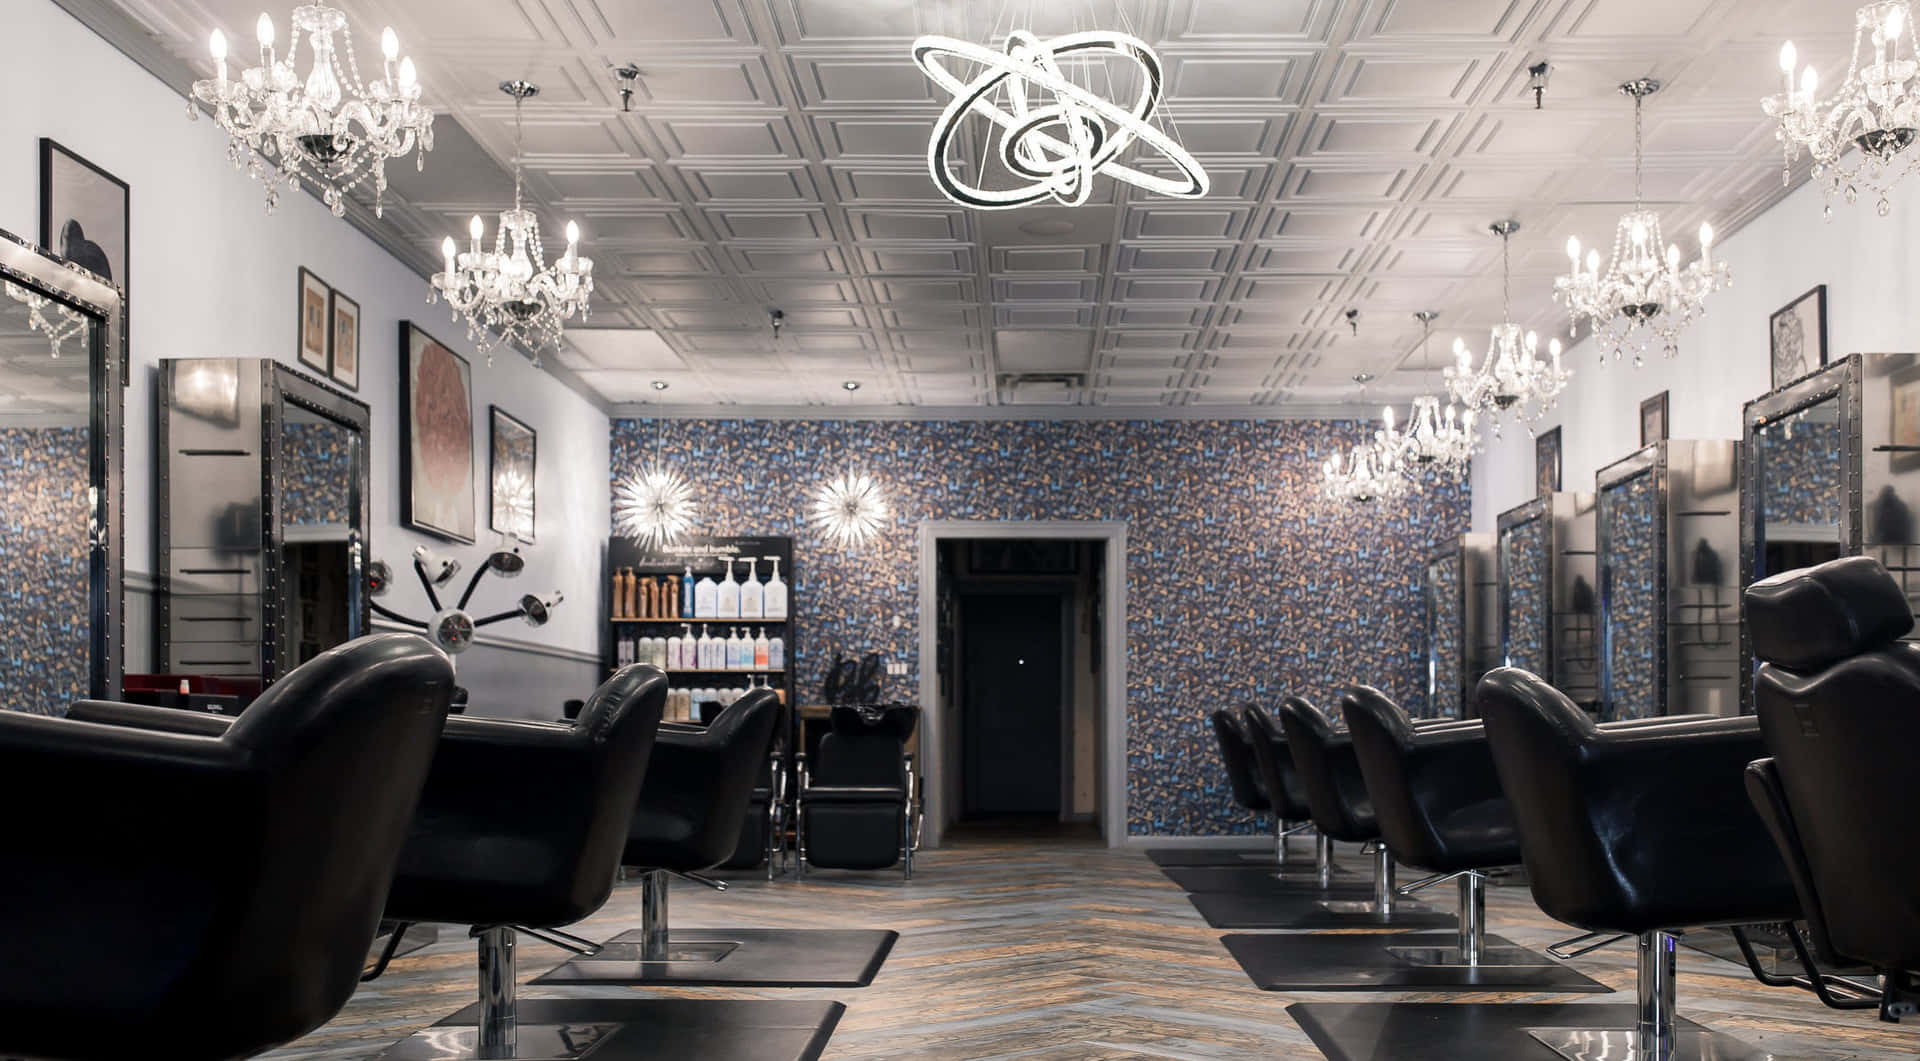 Show your inner beauty with a haircut at your favorite salon